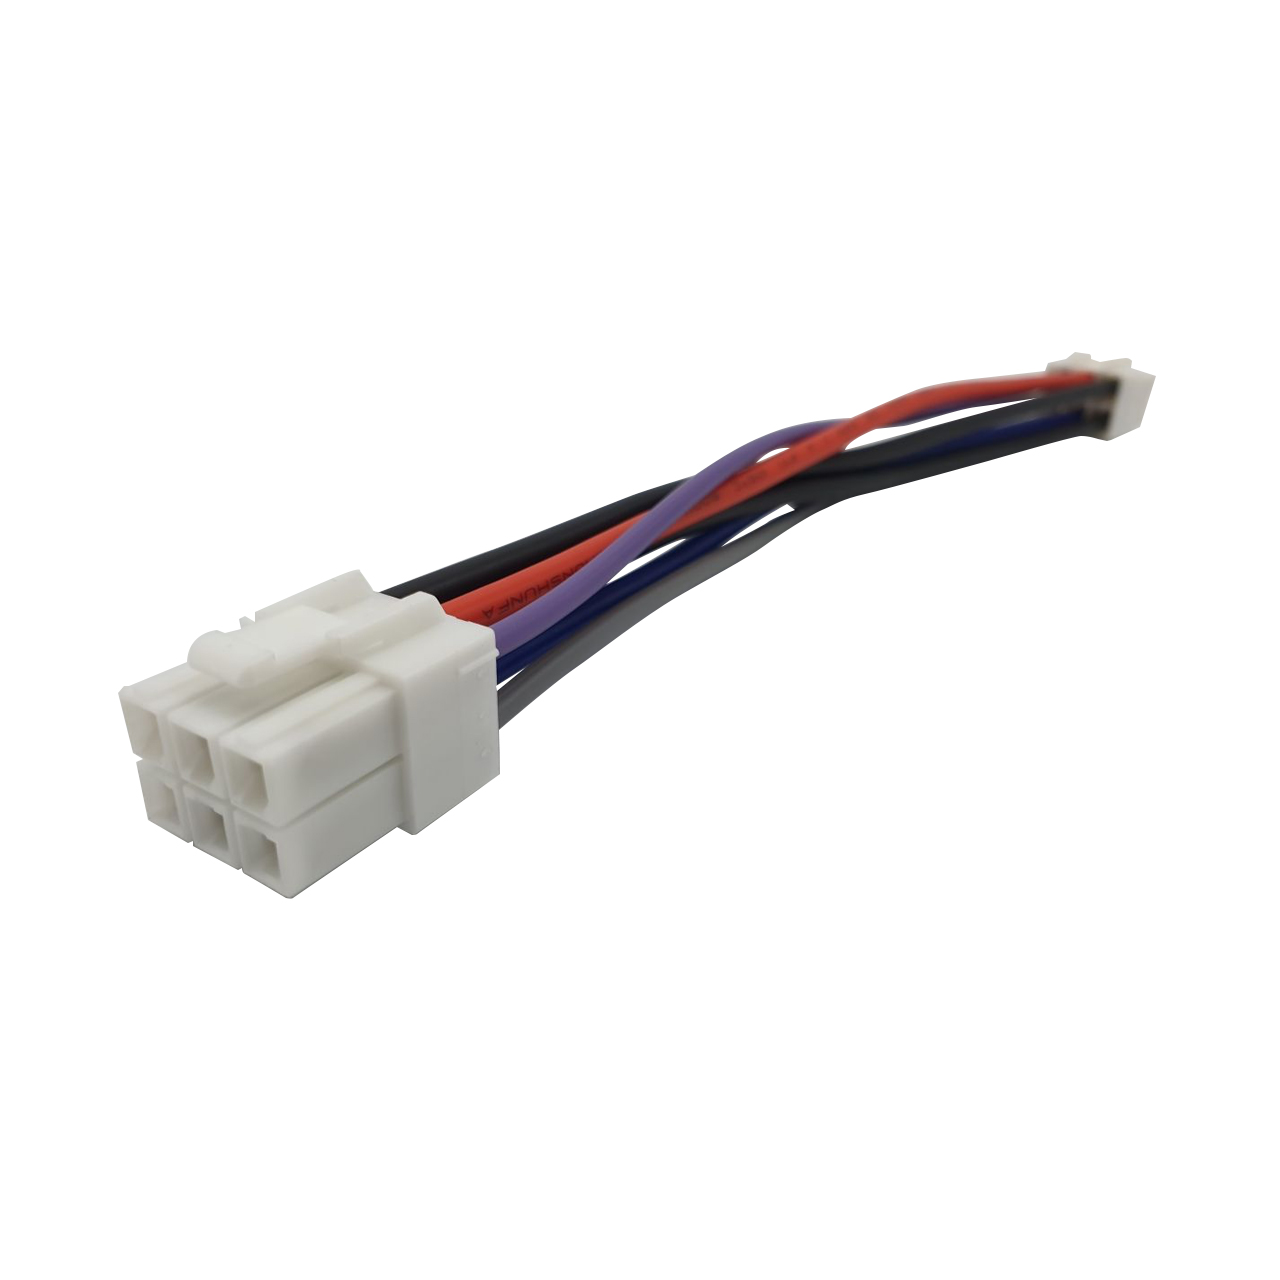 SMPS1200 to NC500 / 1200 / 2k cable